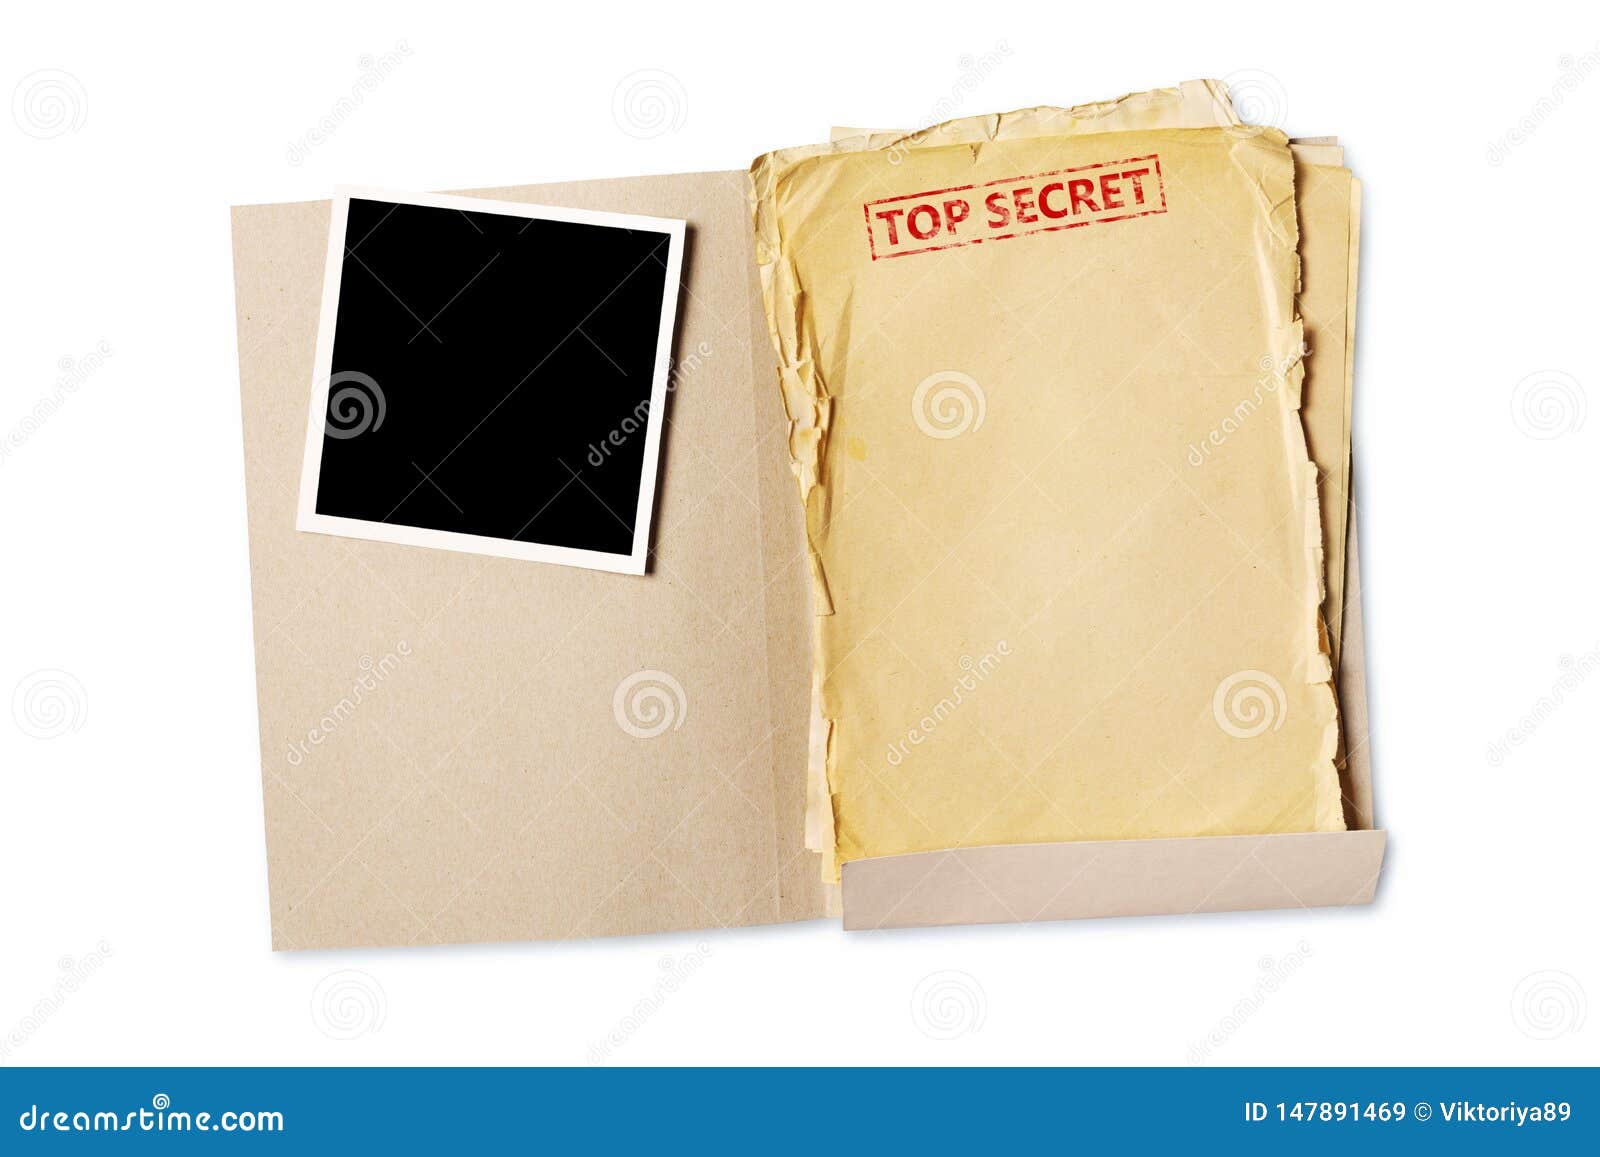 Download Top Secret File Mockup Design Free - Educlips Design: The Mysterious Zip Files : More than 100 ...